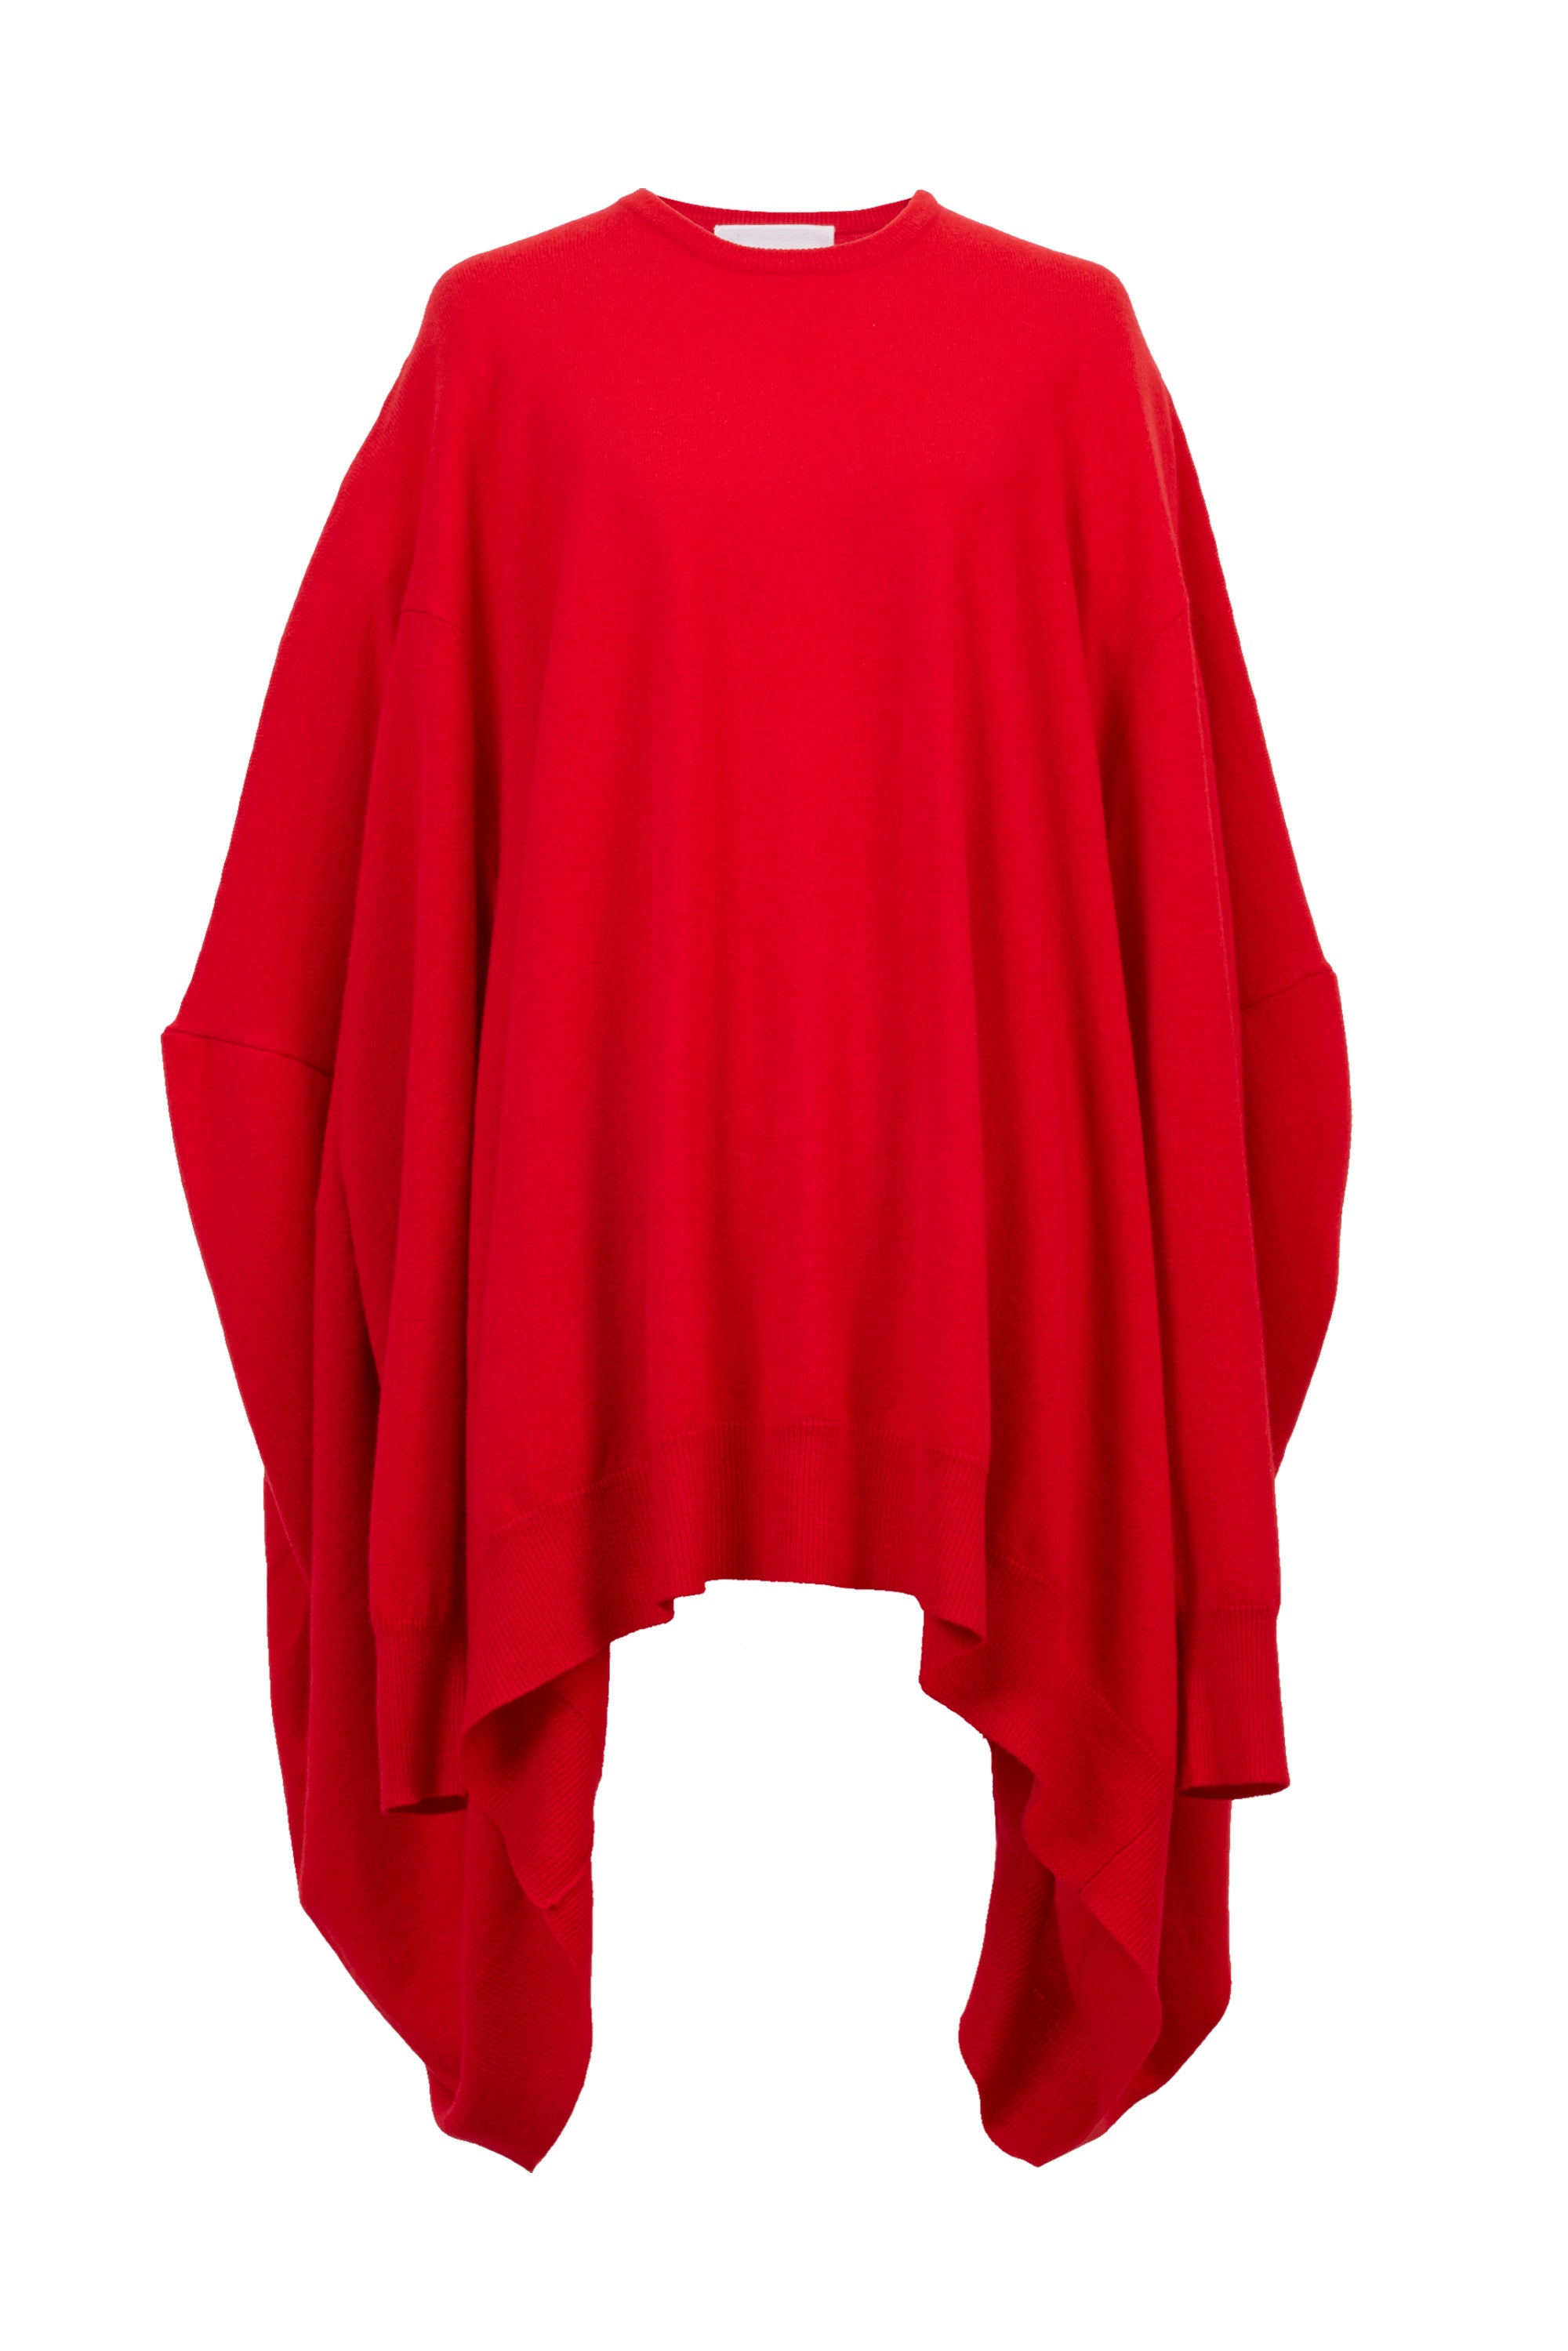 L'Appartement Cashmere C/N Poncho Knitグレー定価